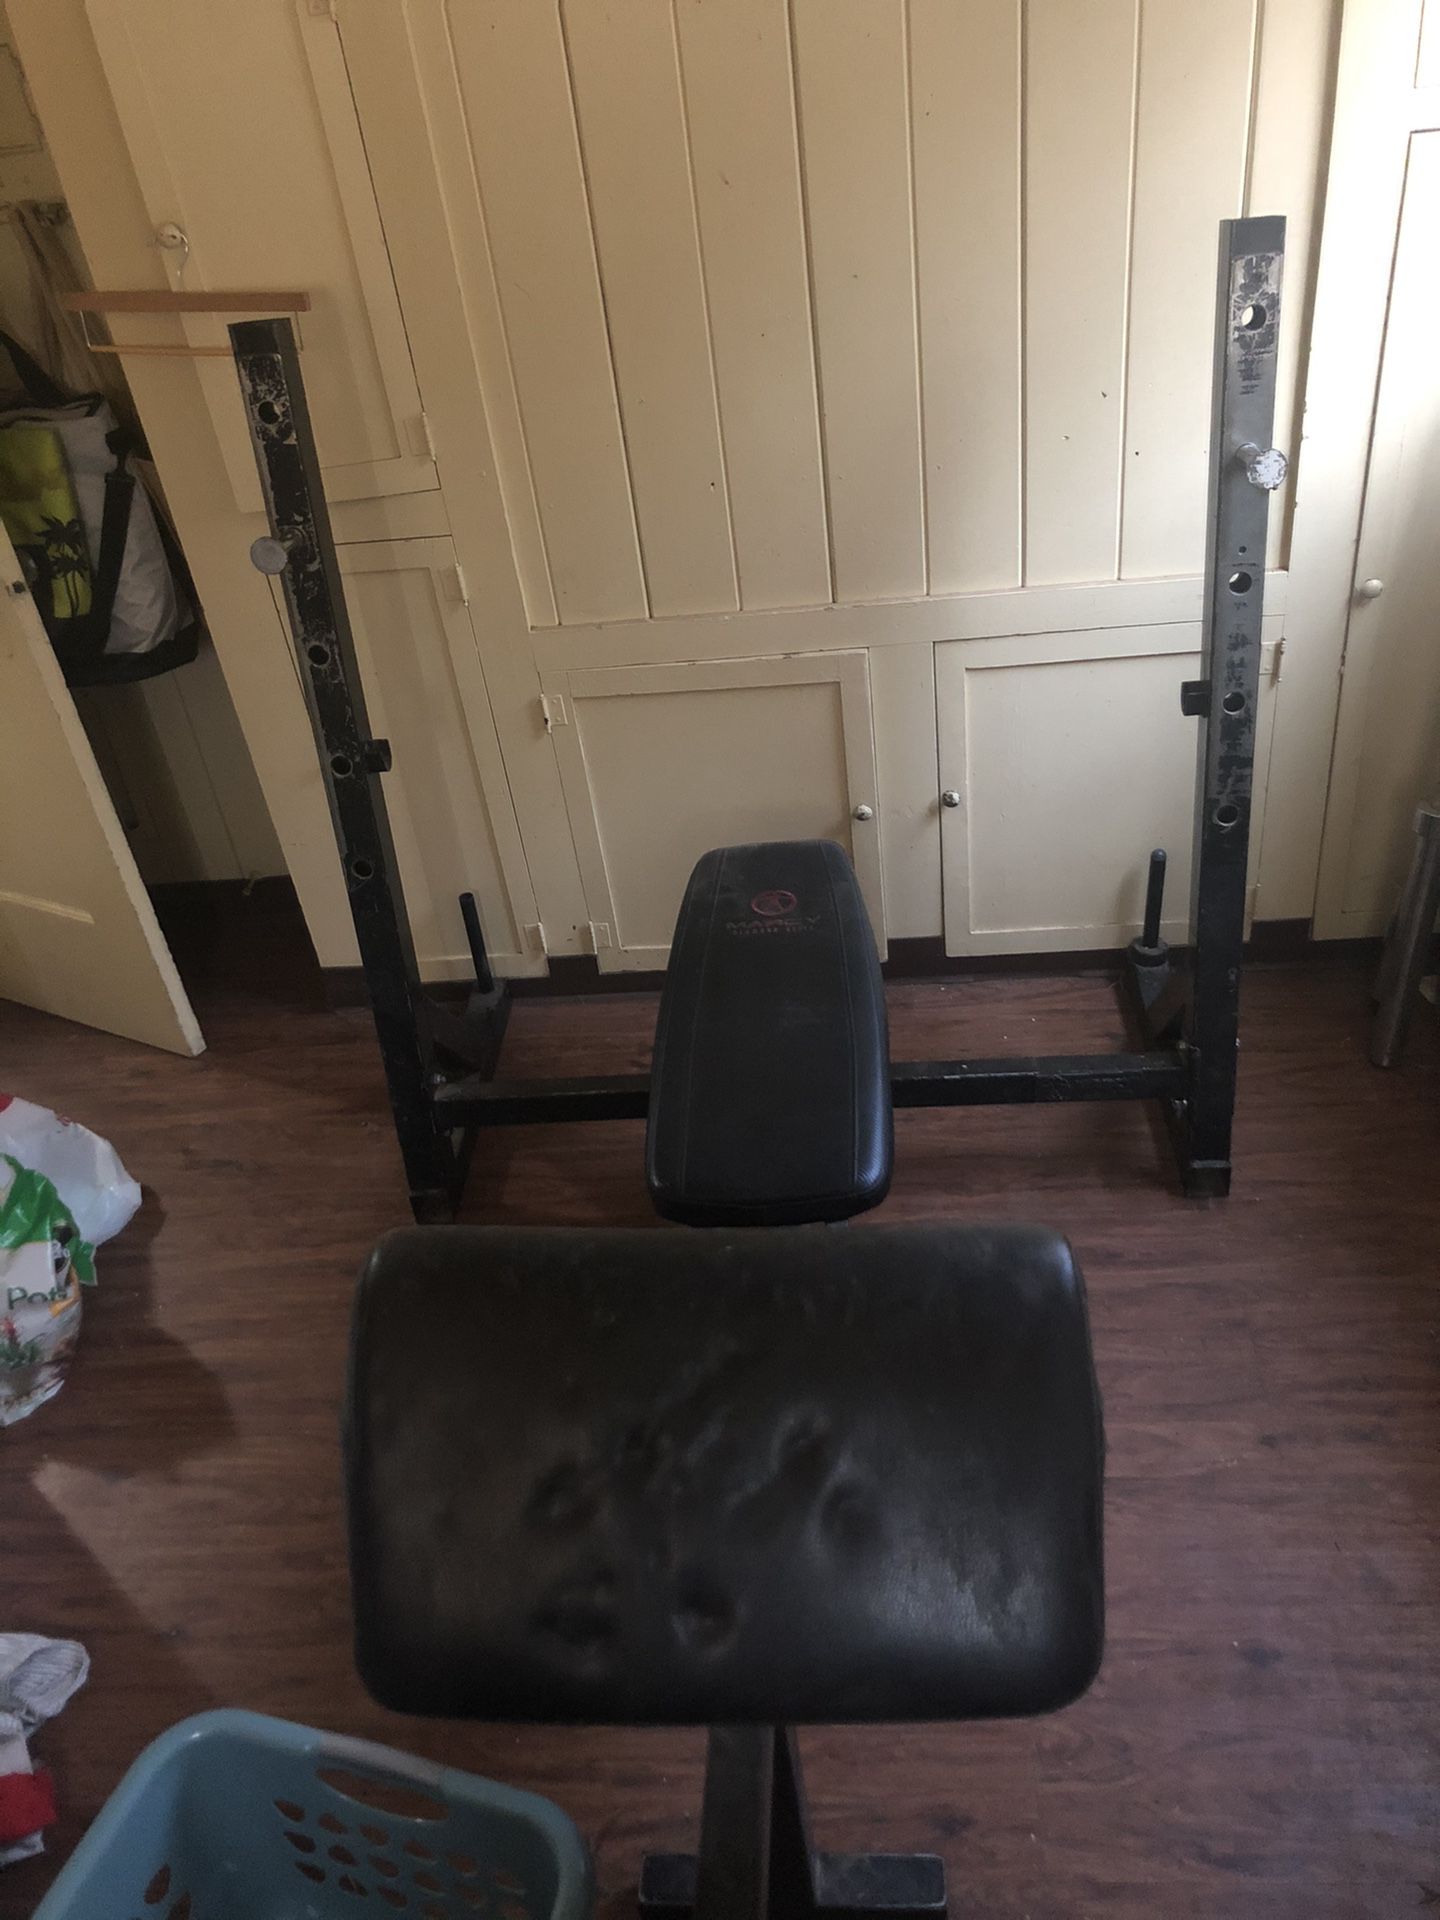 Marcy Bench Press + Preachers Curl + weight rack